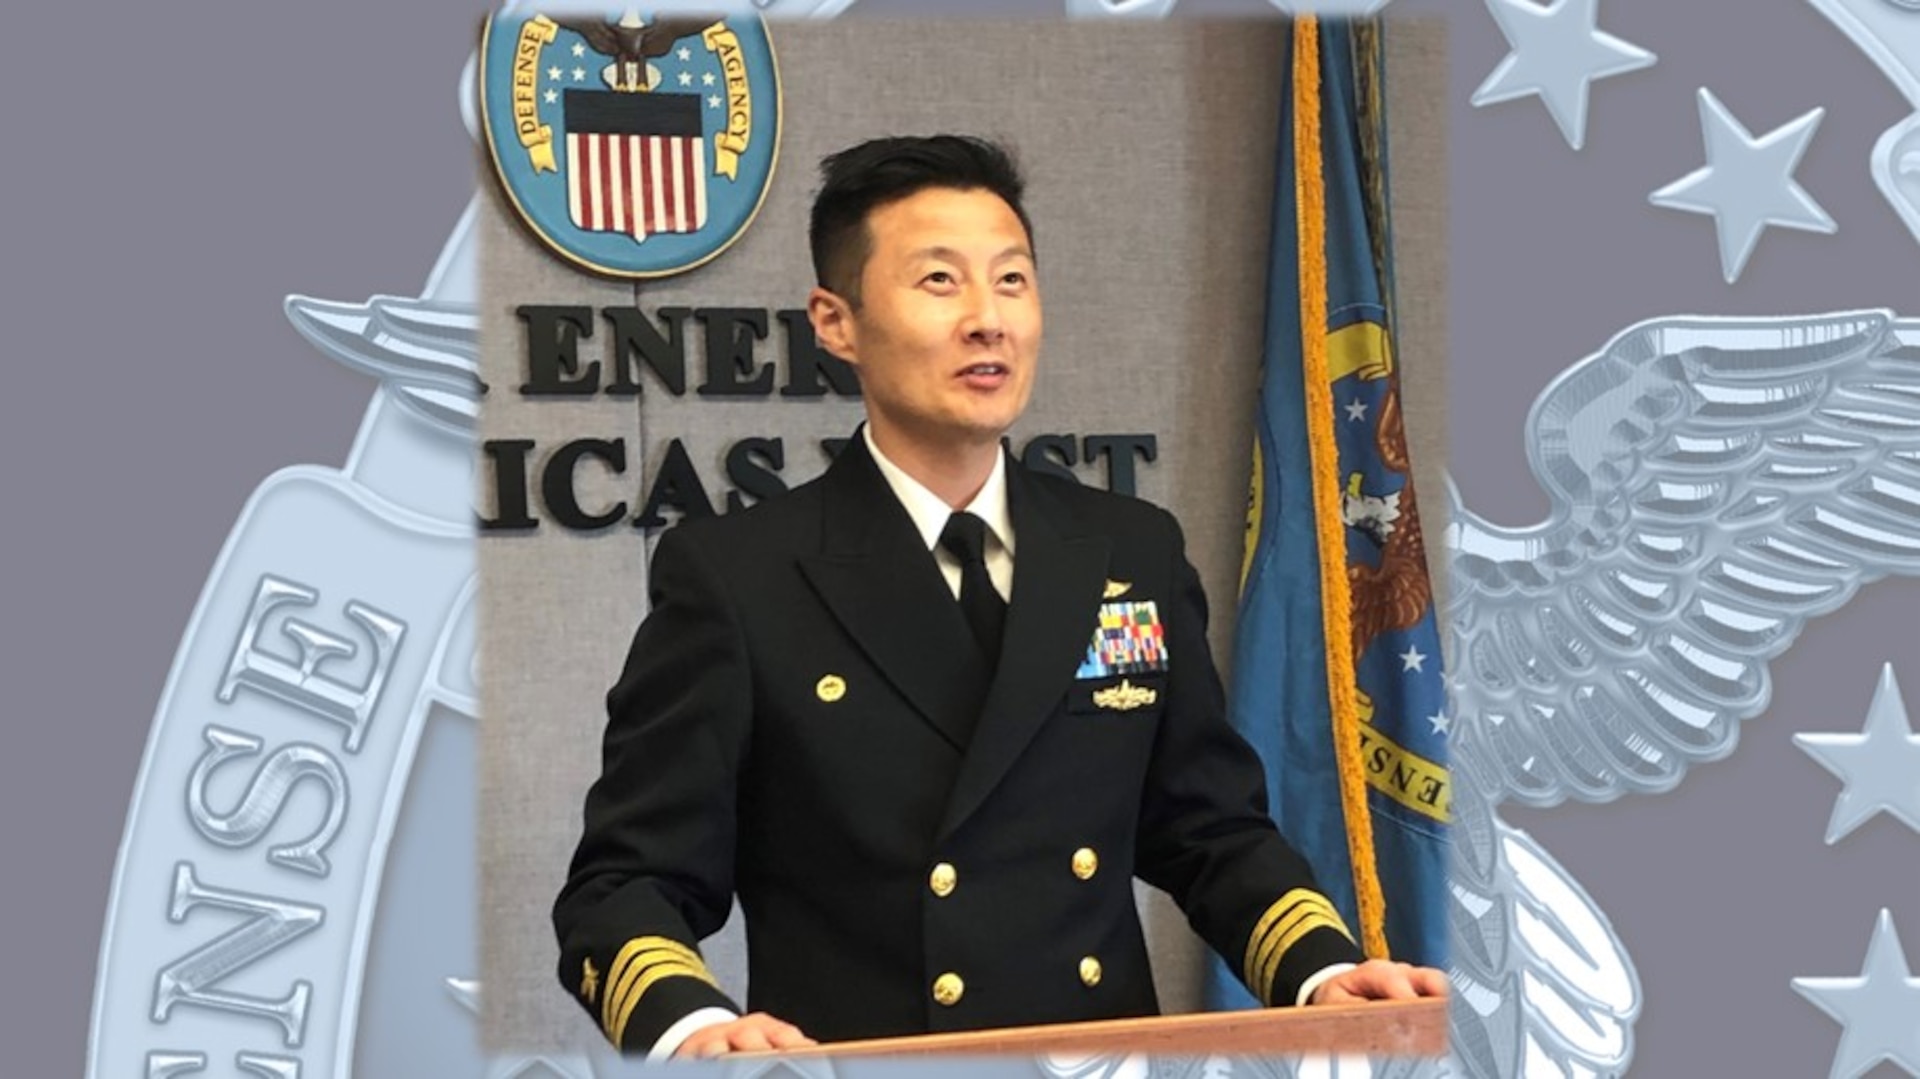 A Navy commander stands at a podium